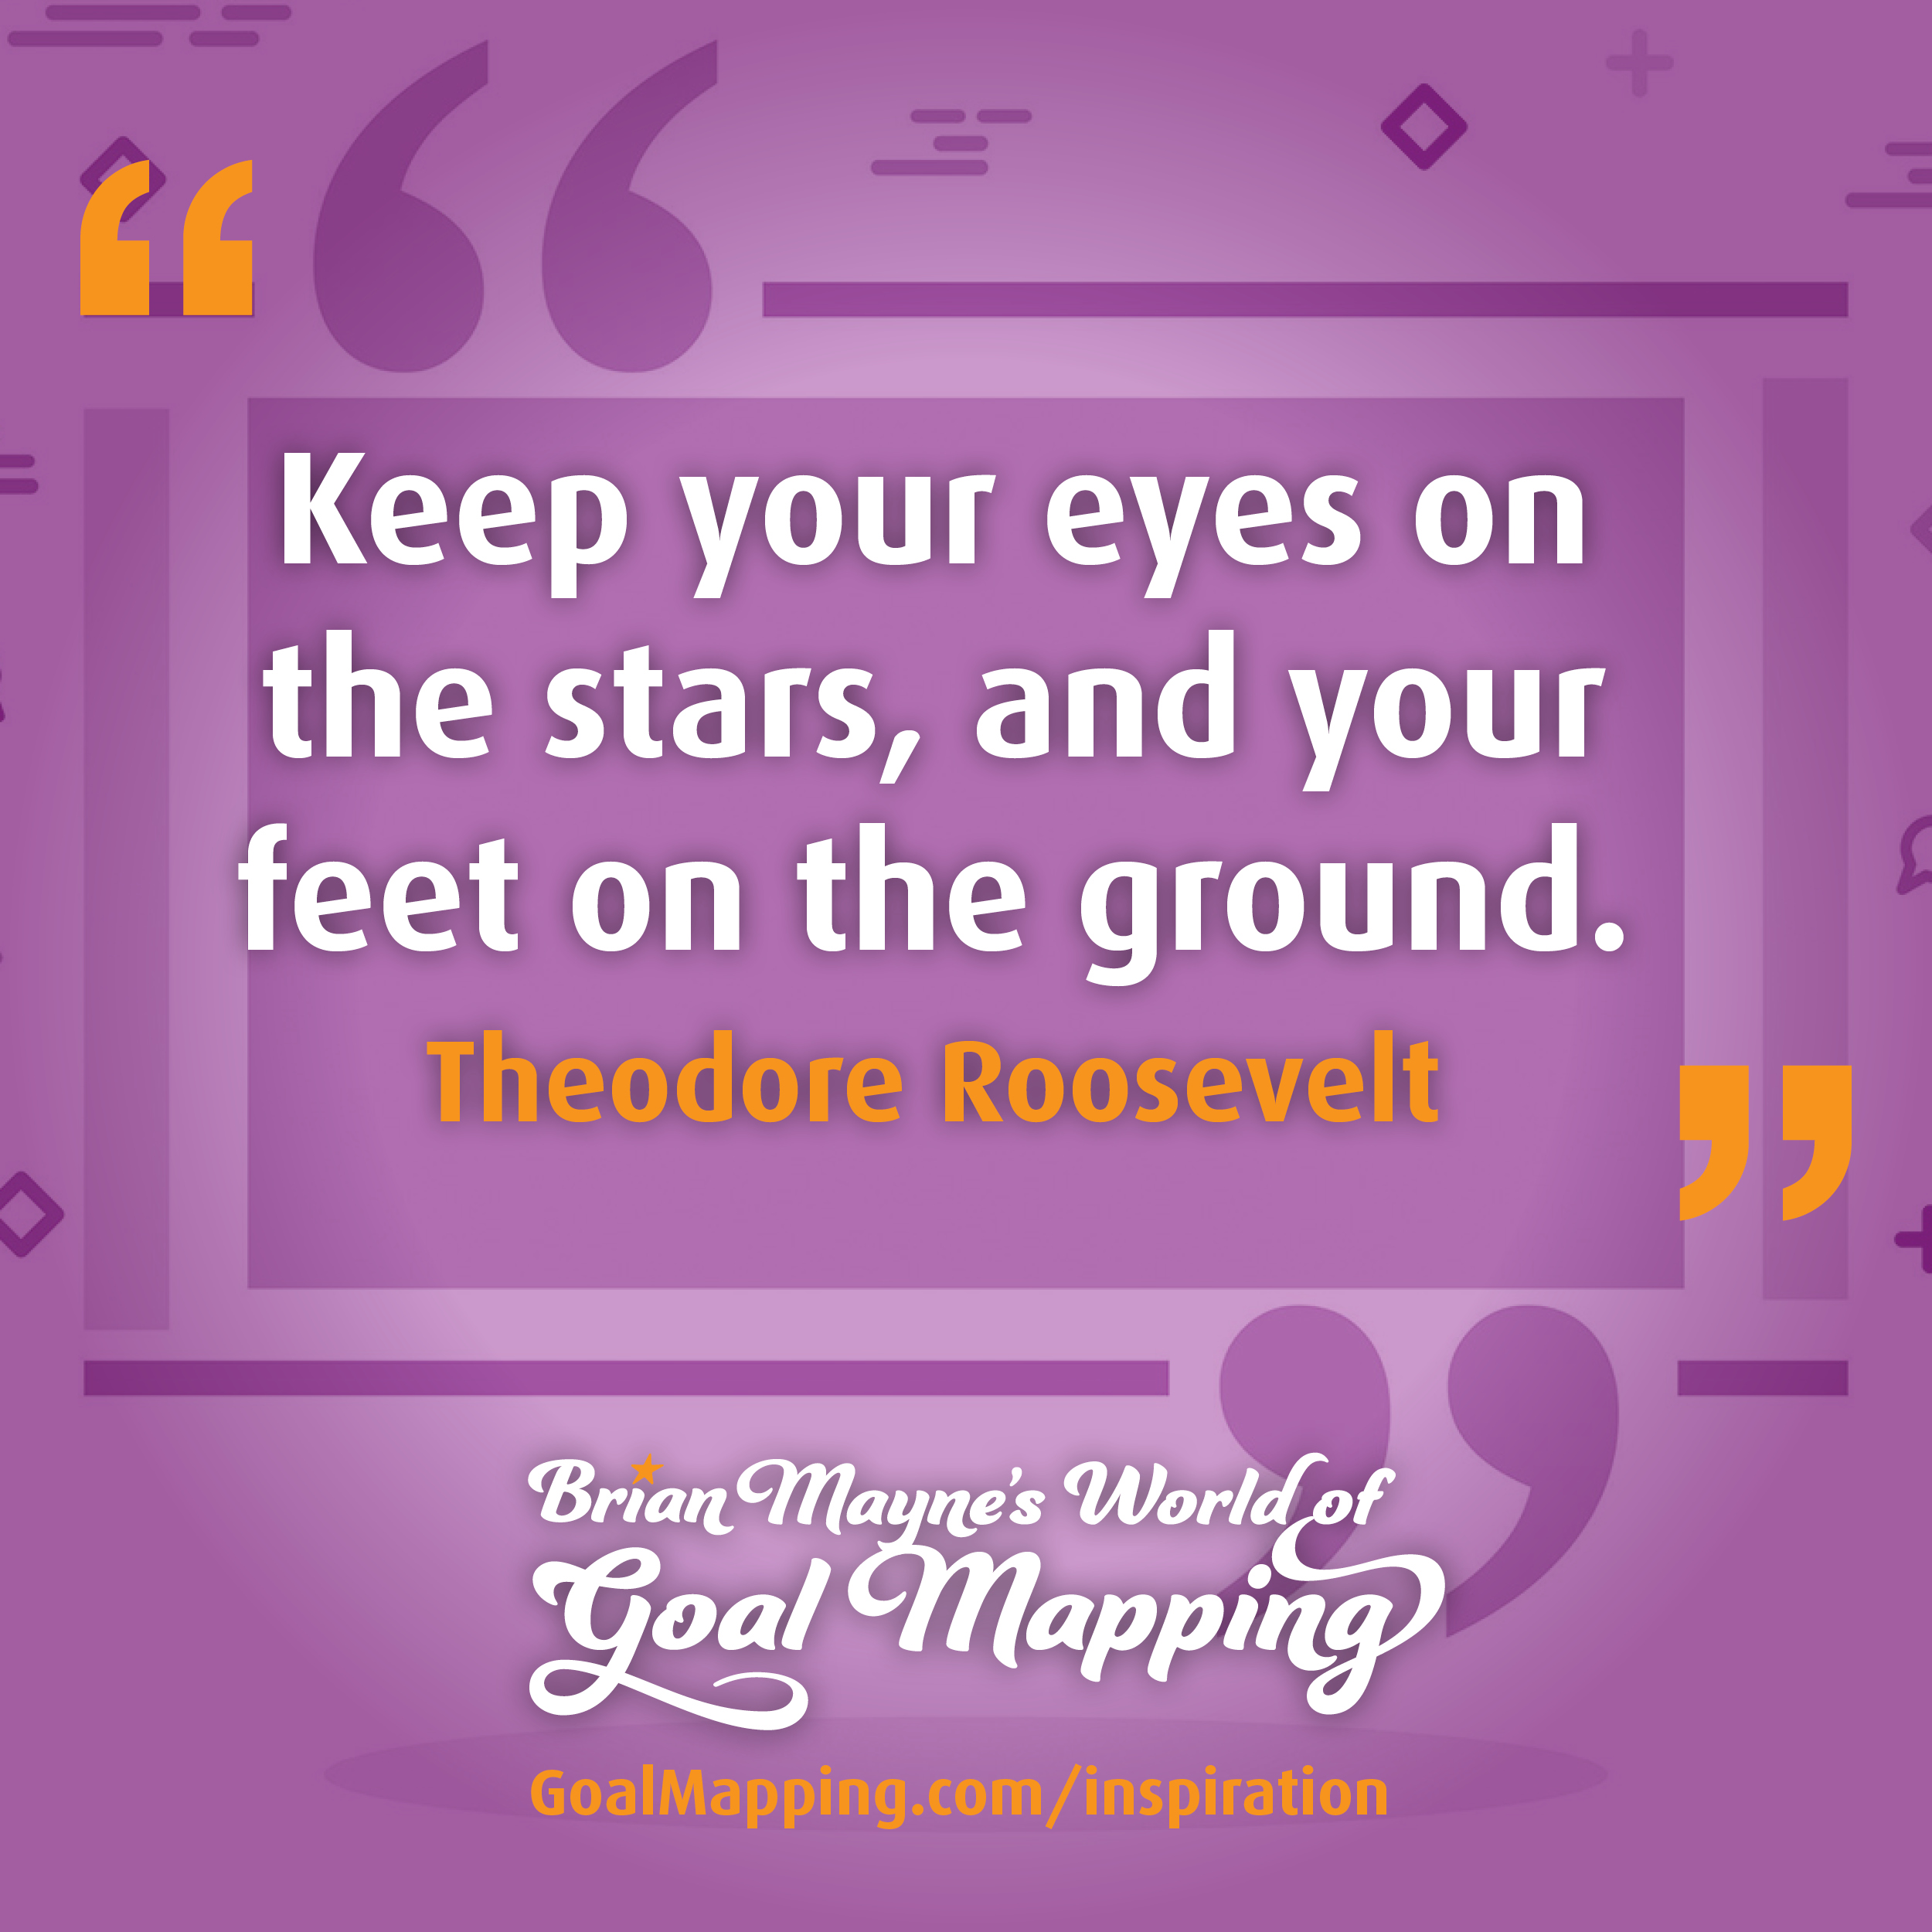 "Keep your eyes on the stars, and your feet on the ground." Theodore Roosevelt